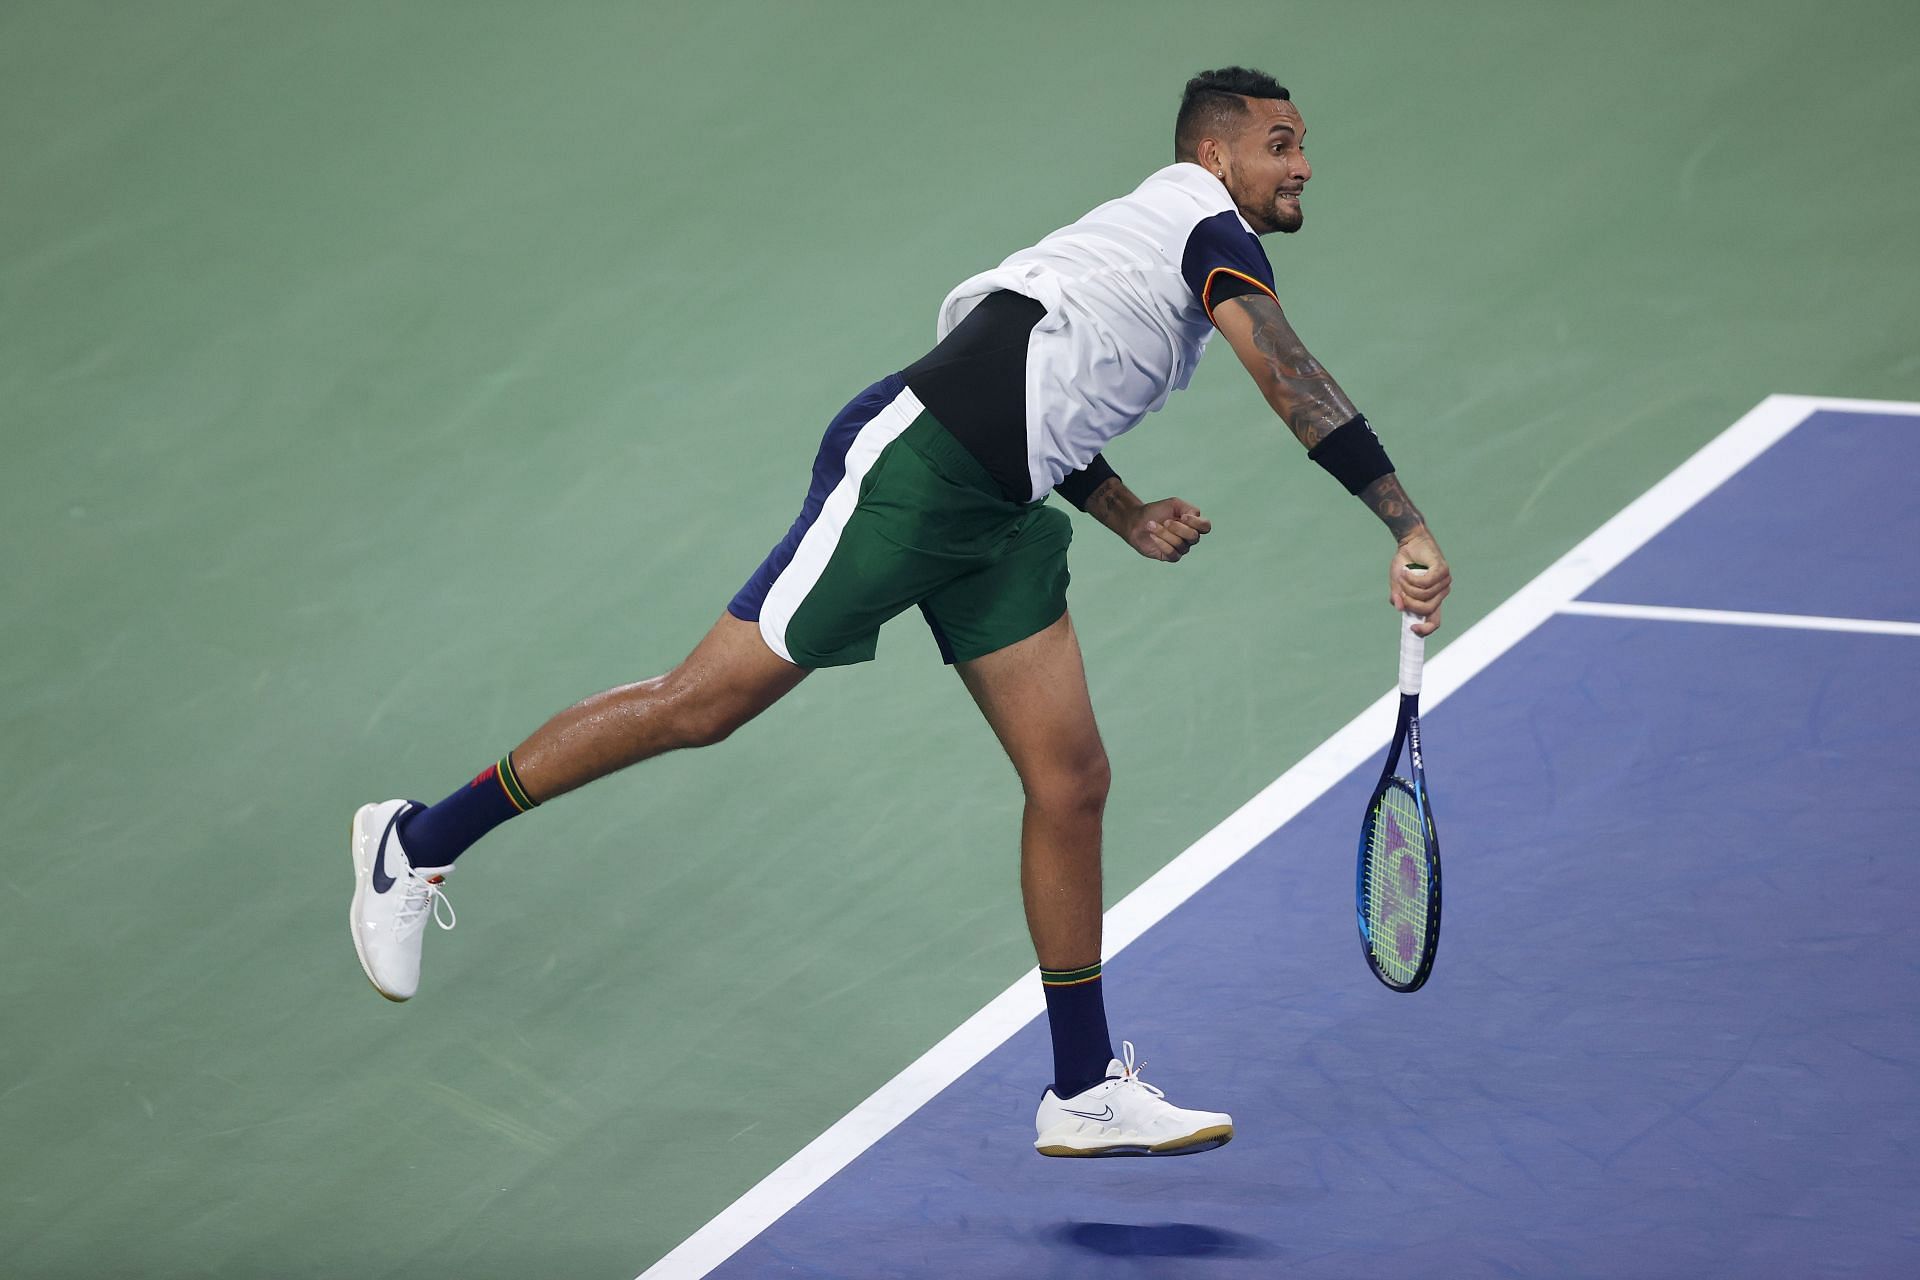 Nick Kyrgios has withdrawn from the Sydney International after testing positive for COVID-19